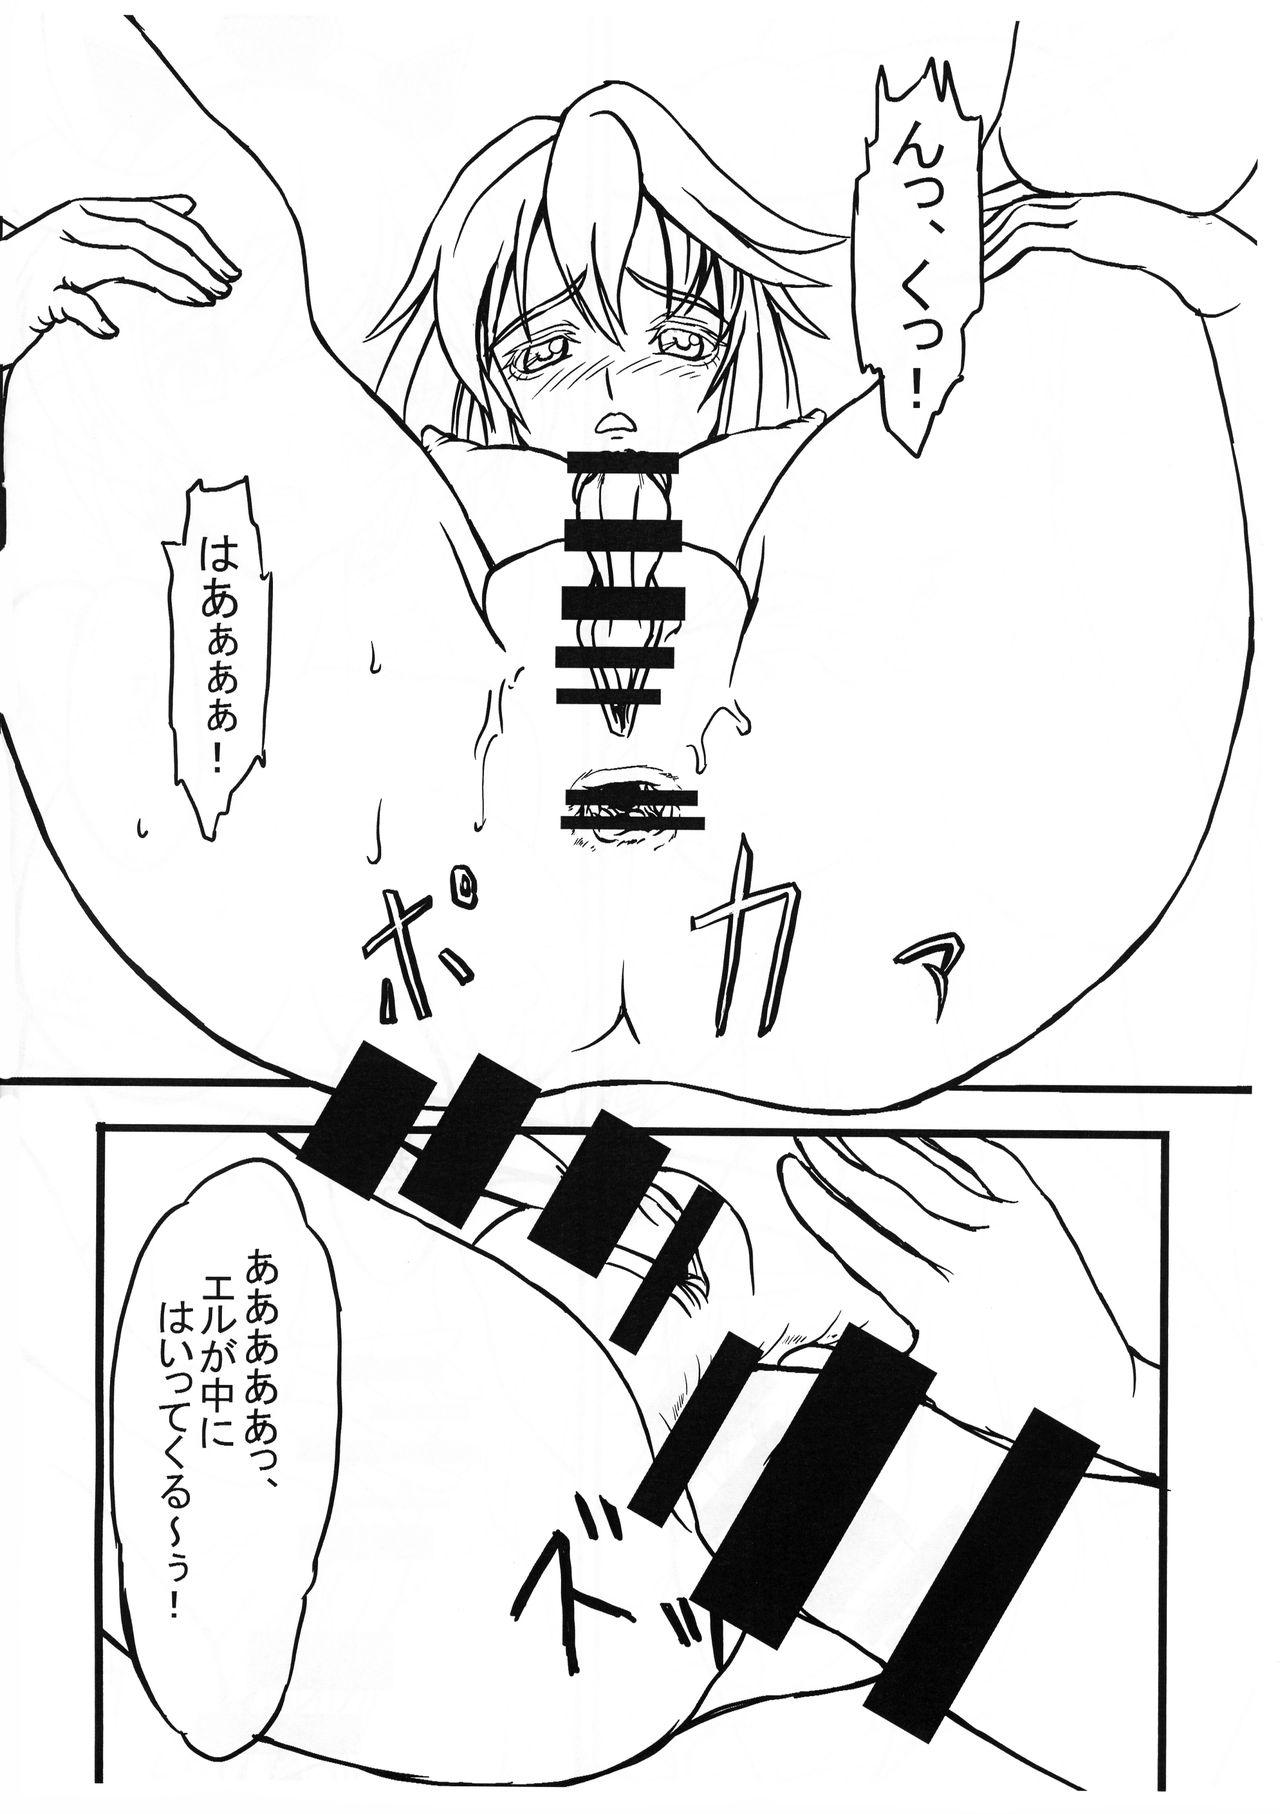 Stretching Surosuro - Guilty gear Transexual - Page 6